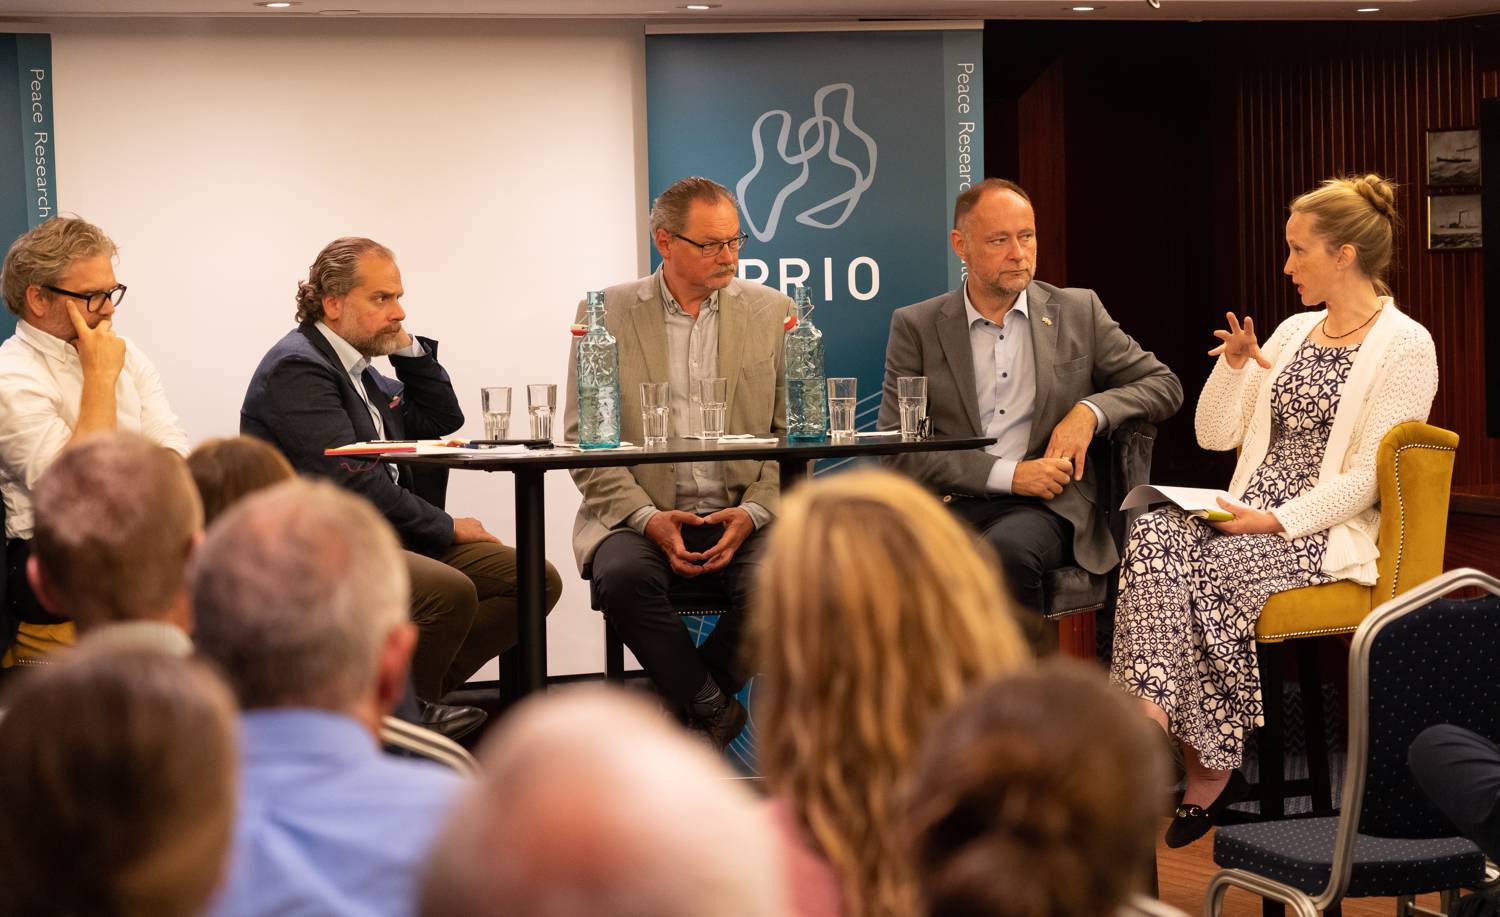 Panel discussion on the UN Security Council Post-Ukraine and Norway's role in the Council. From left: Andreas Løvold (Norwegian MFA), Jamal al-Mussawi (US Embassy), Pavel Baev (PRIO), Richard Wood (British Ambassador to Norway), Louise Olsson (PRIO). Photo: PRIO / Vera Lind Hansen